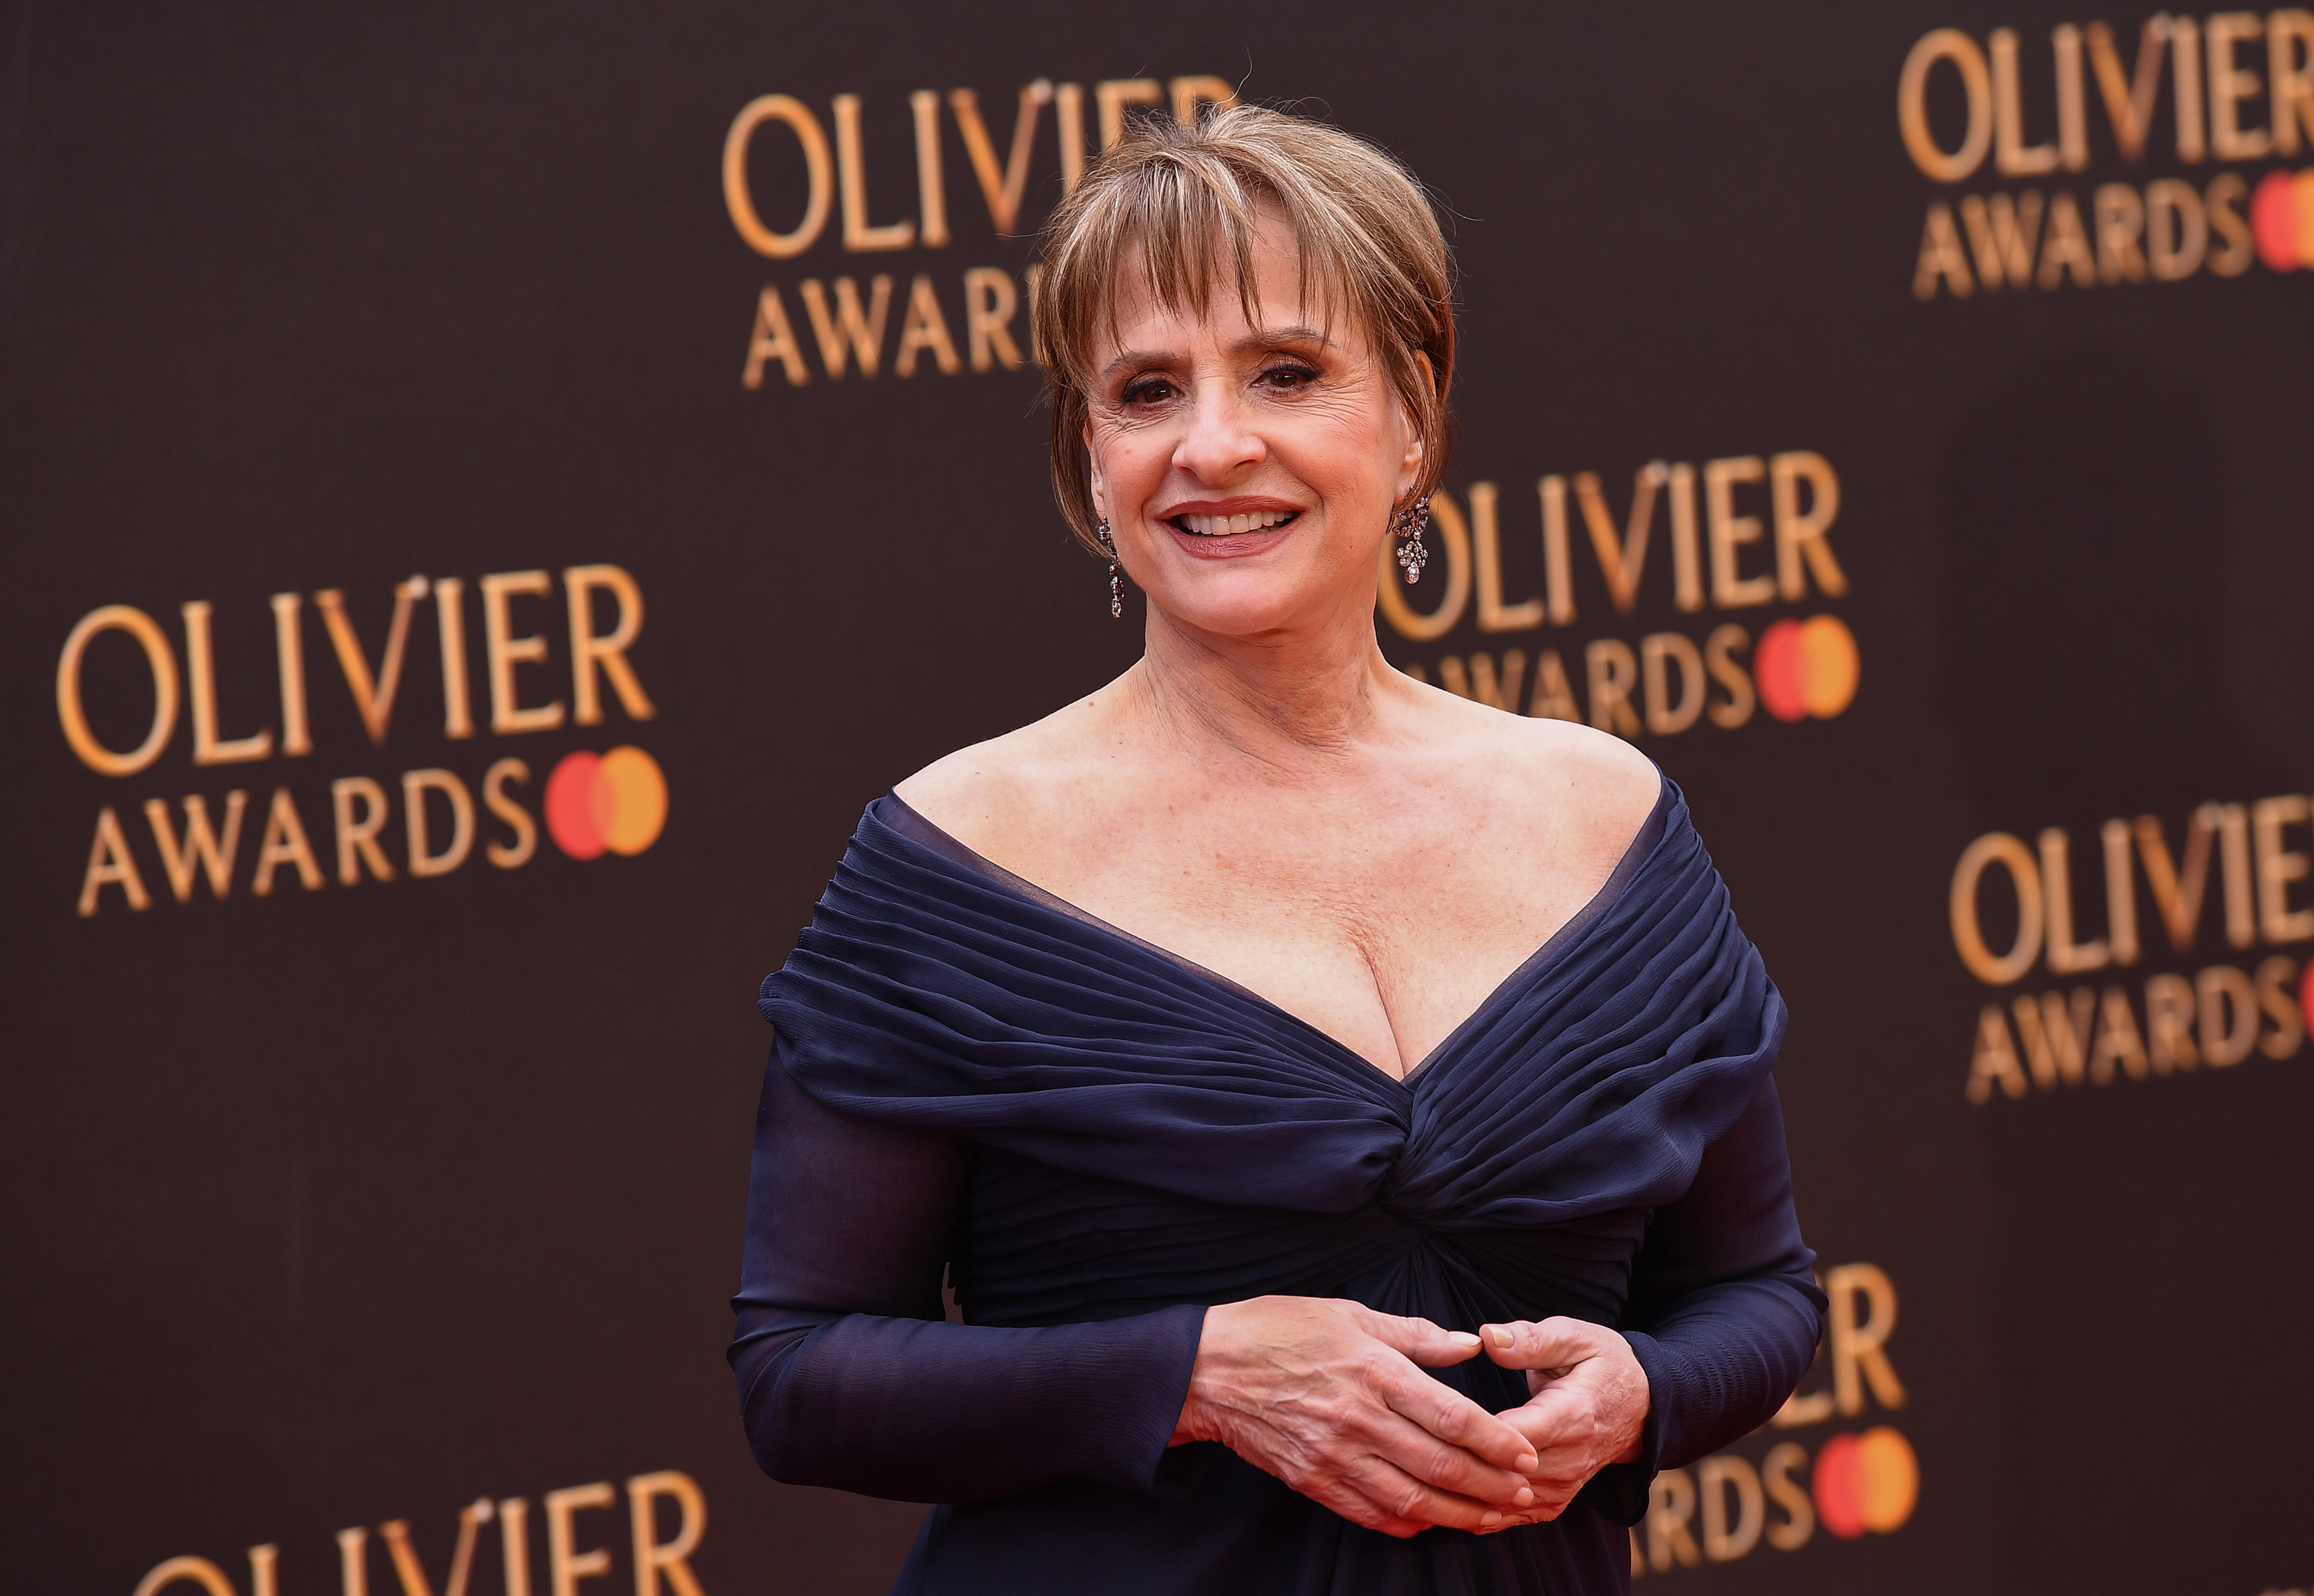 Patti LuPone smiling on the red carpet